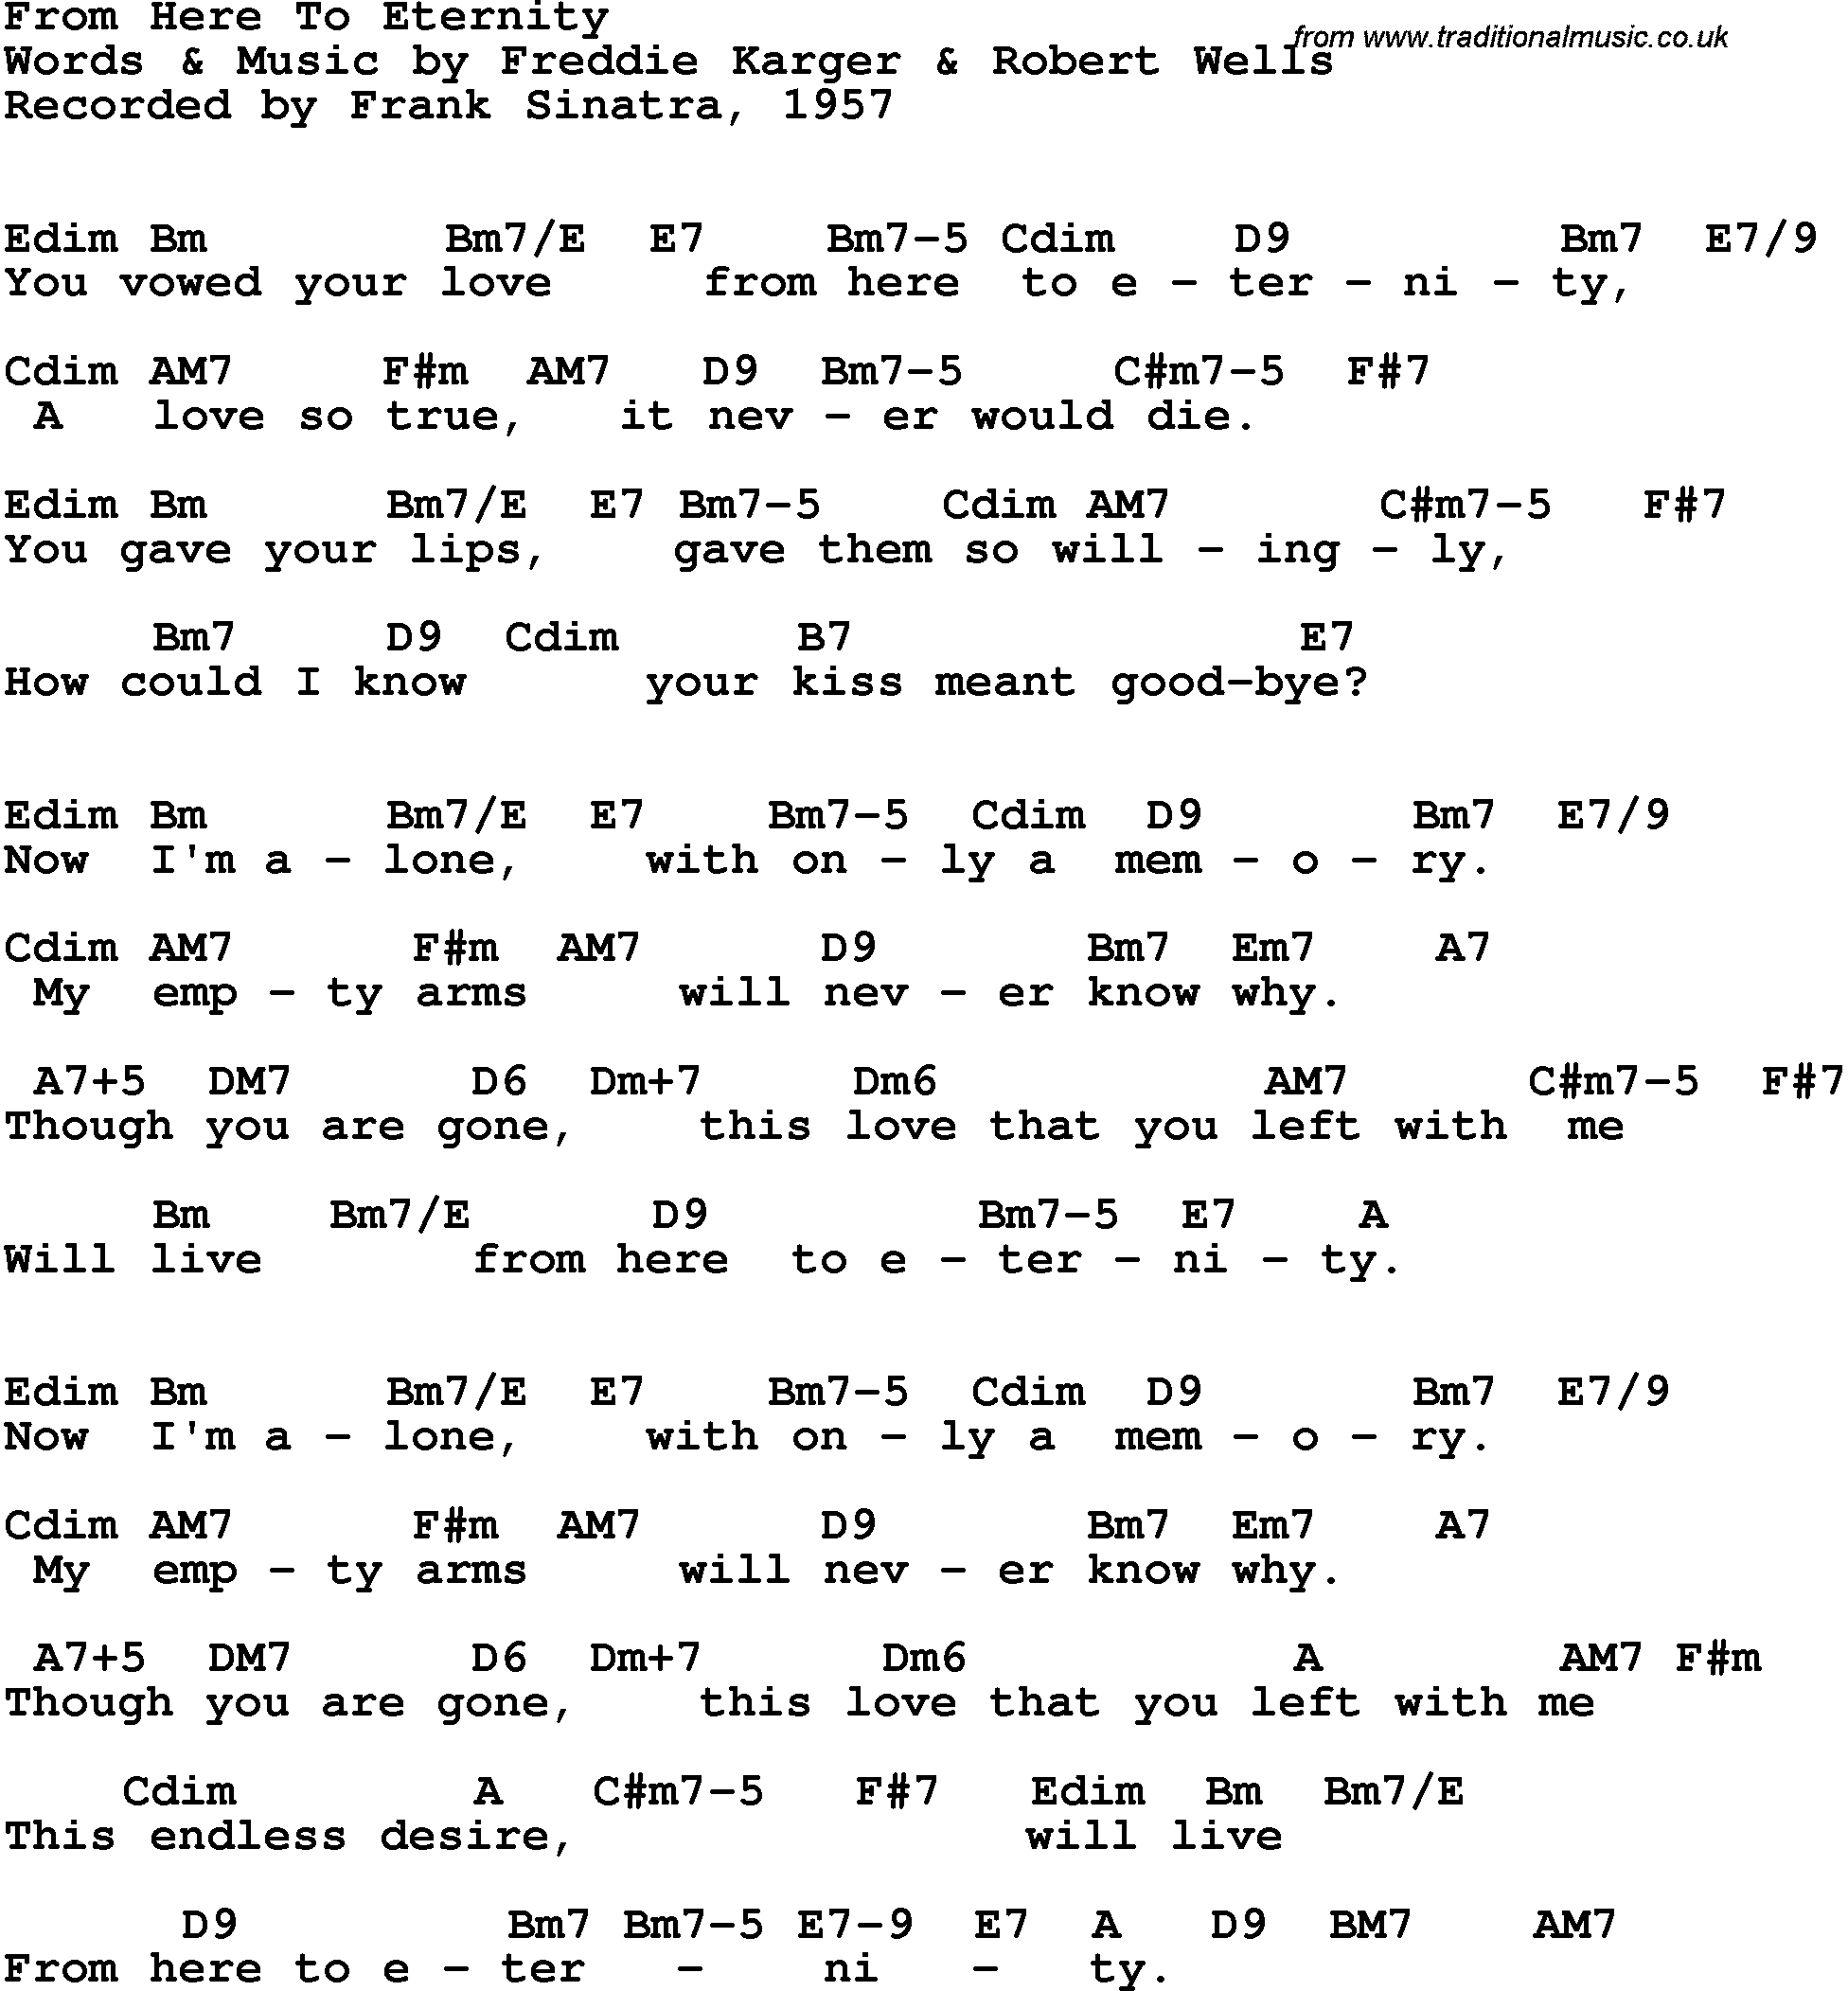 Song Lyrics with guitar chords for From Here To Eternity - Frank Sinatra, 1957